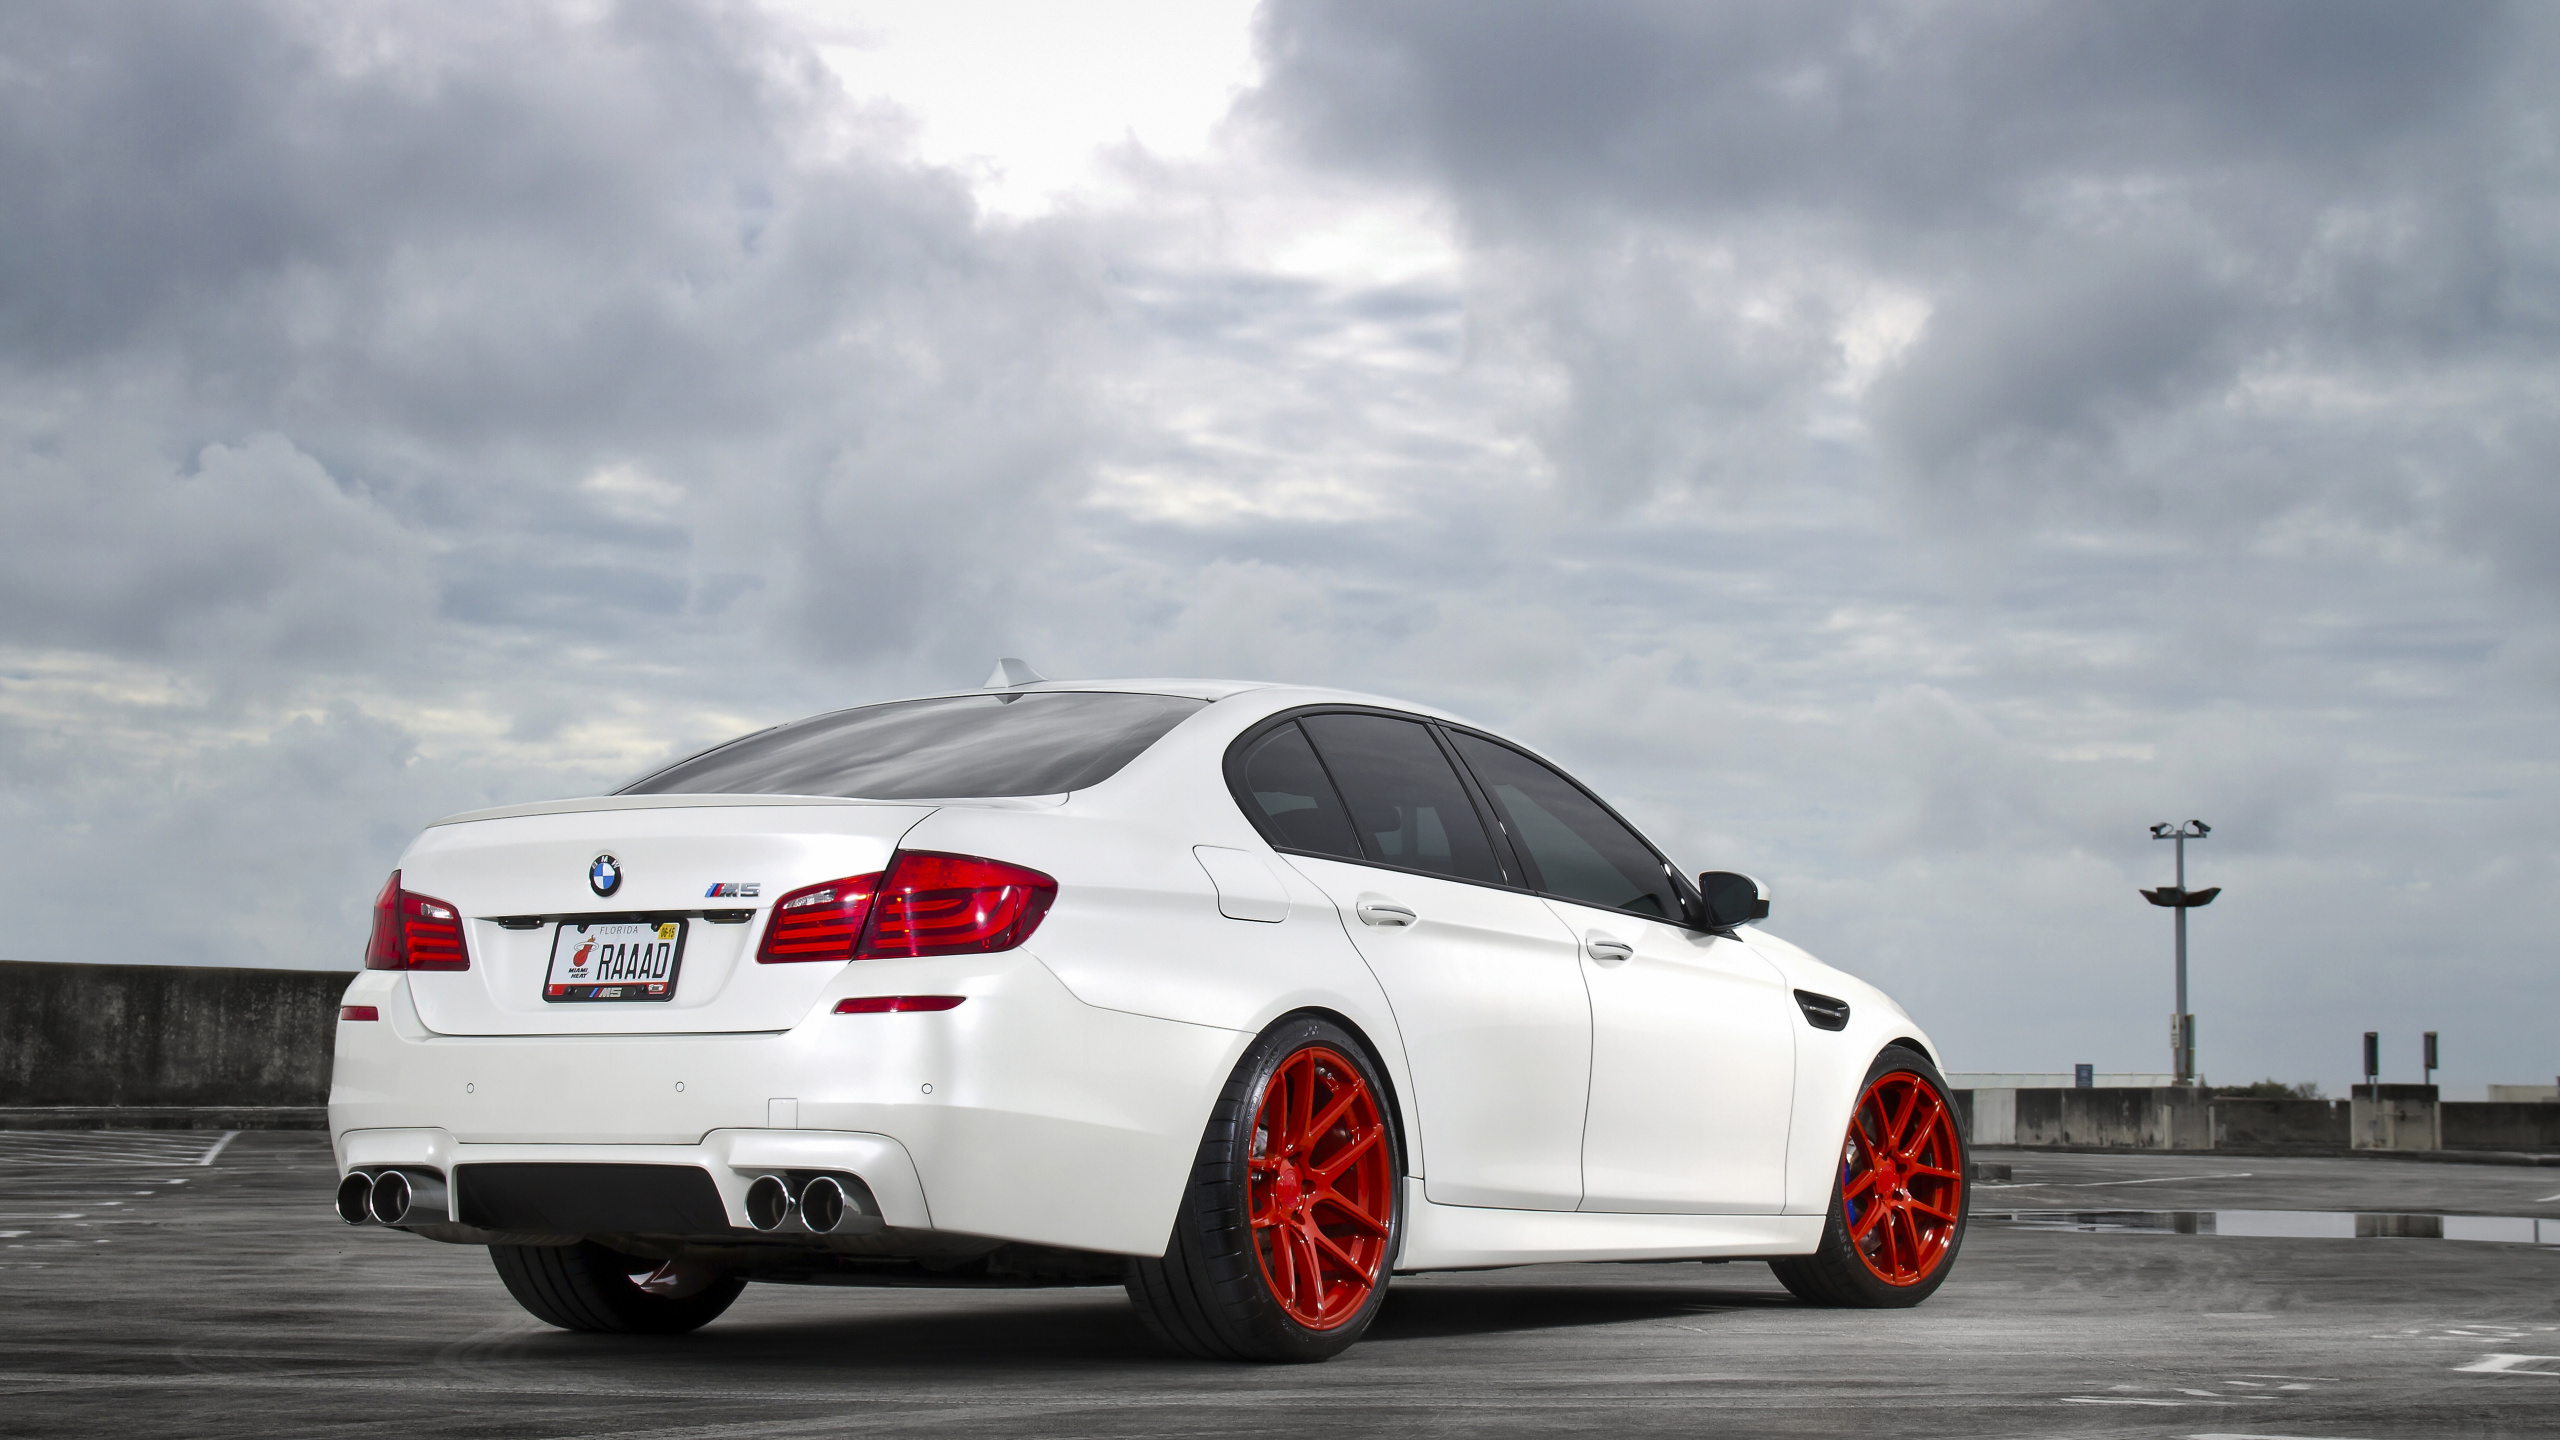 White Bmw m 3 Coupe on Gray Asphalt Road. Wallpaper in 2560x1440 Resolution